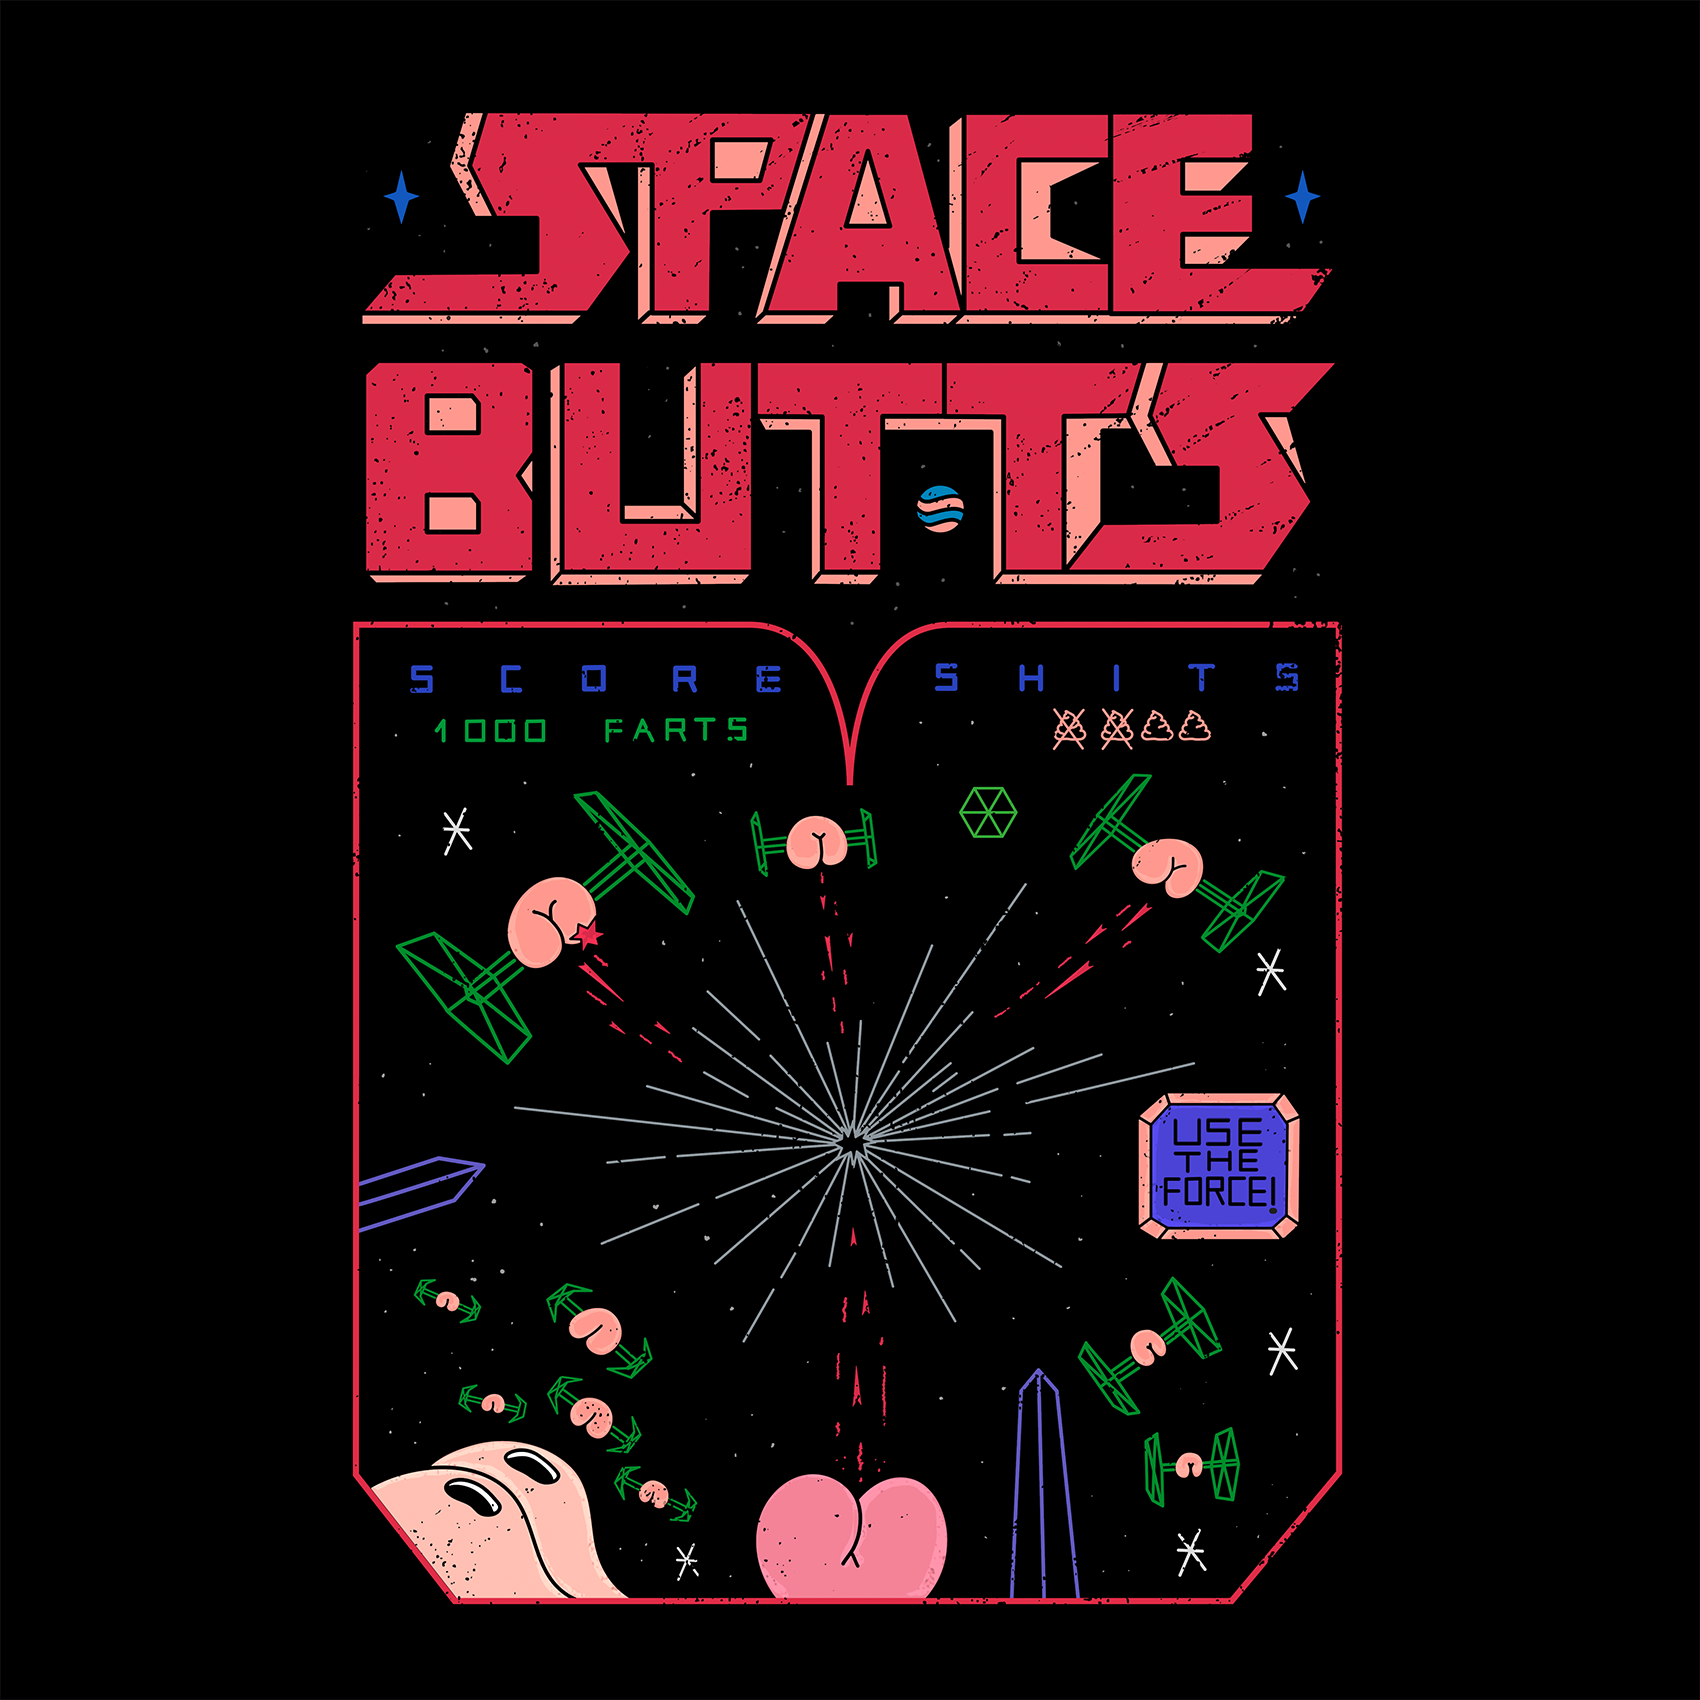 Space Butts